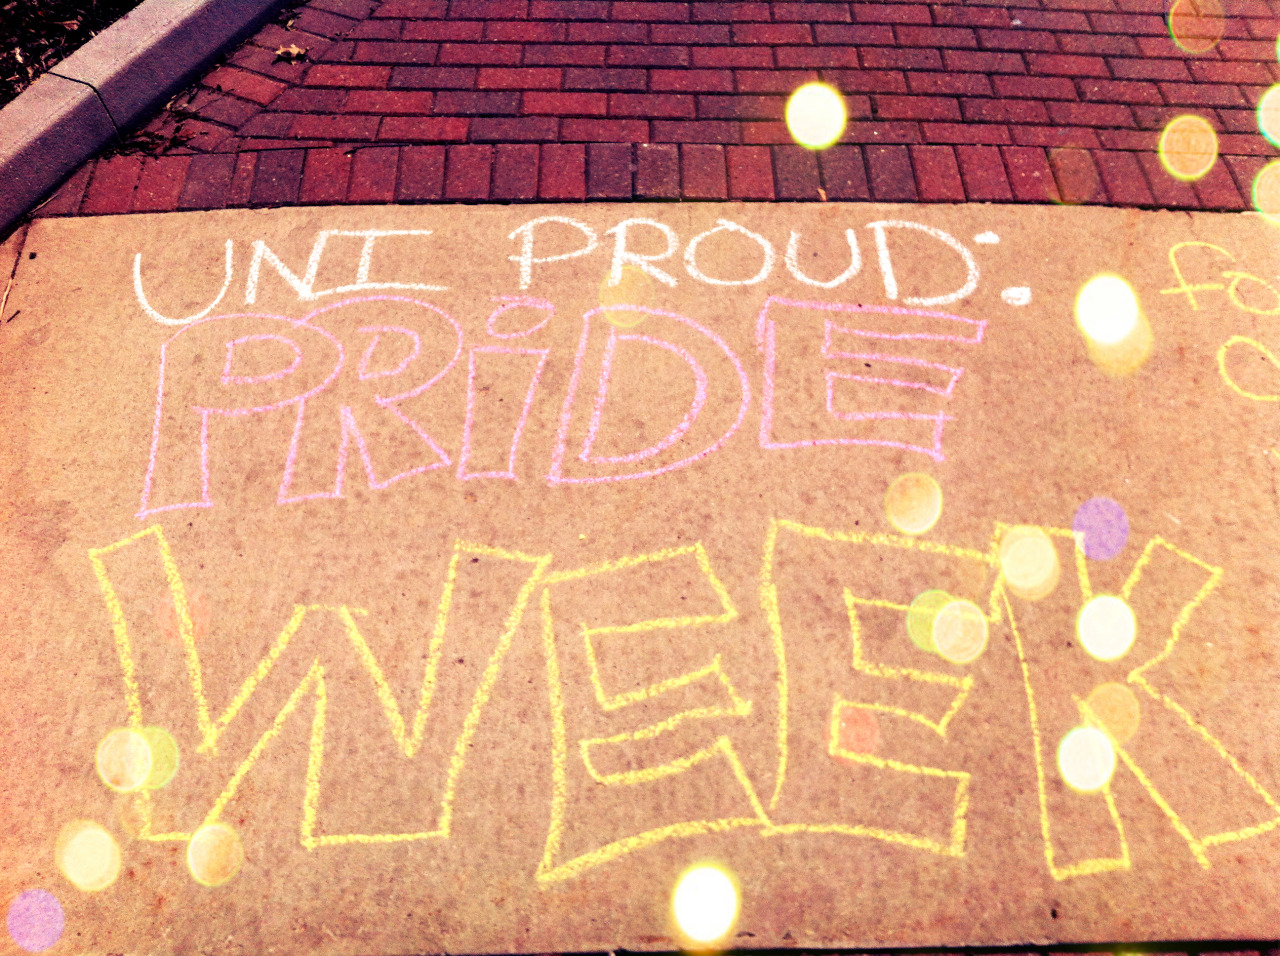 Pride Week at UNI starts tomorrow! Check out some of the chalking we did around campus. See an awesome design that&#8217;s not featured here? Snap a pic and submit it!